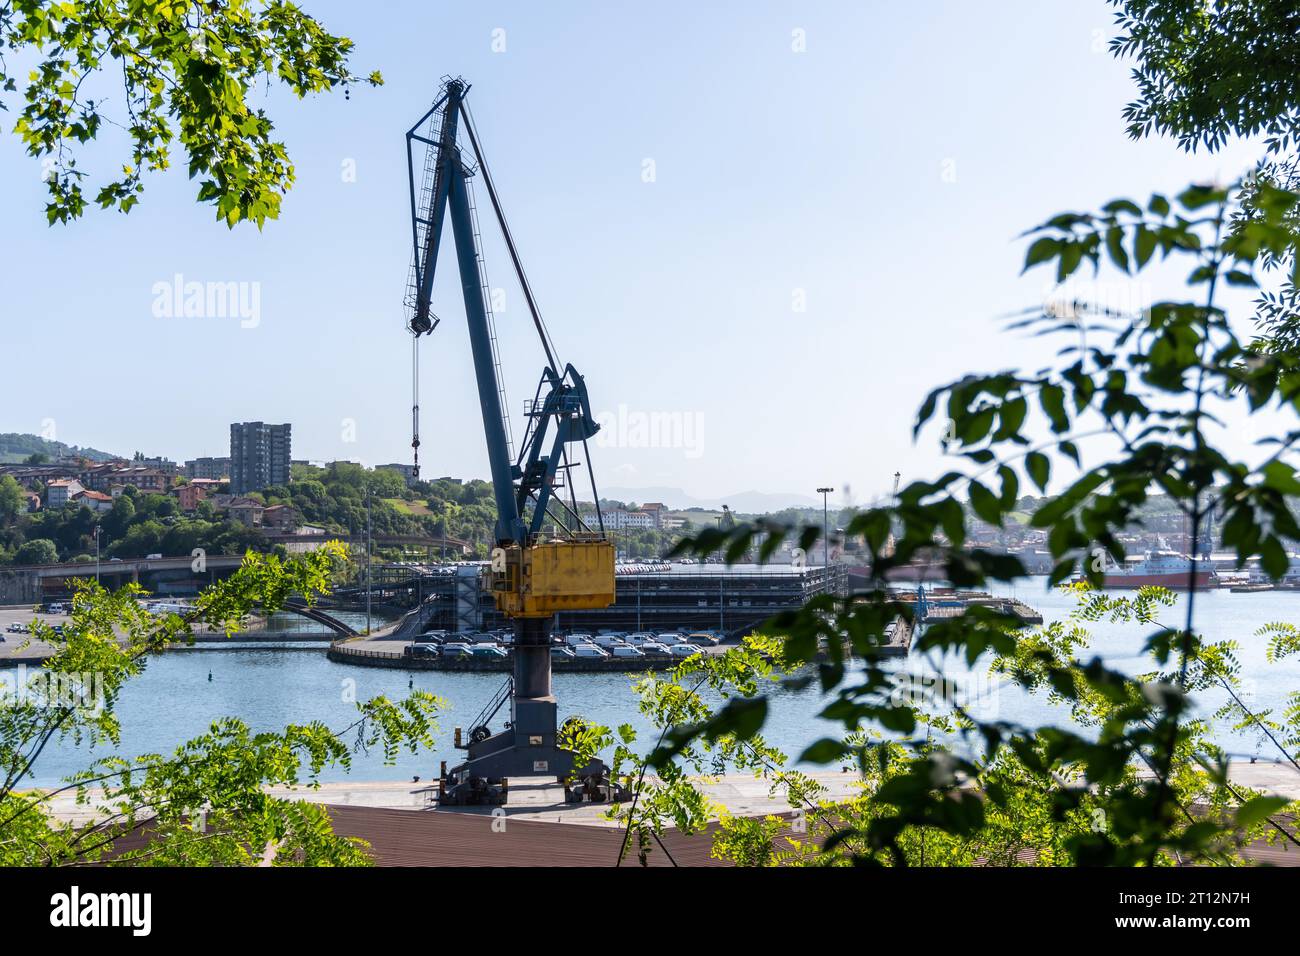 Crane of the port of Pasajes in the municipality of Lezo, the small coastal town in the province of Gipuzkoa, Basque Country. Spain Stock Photo